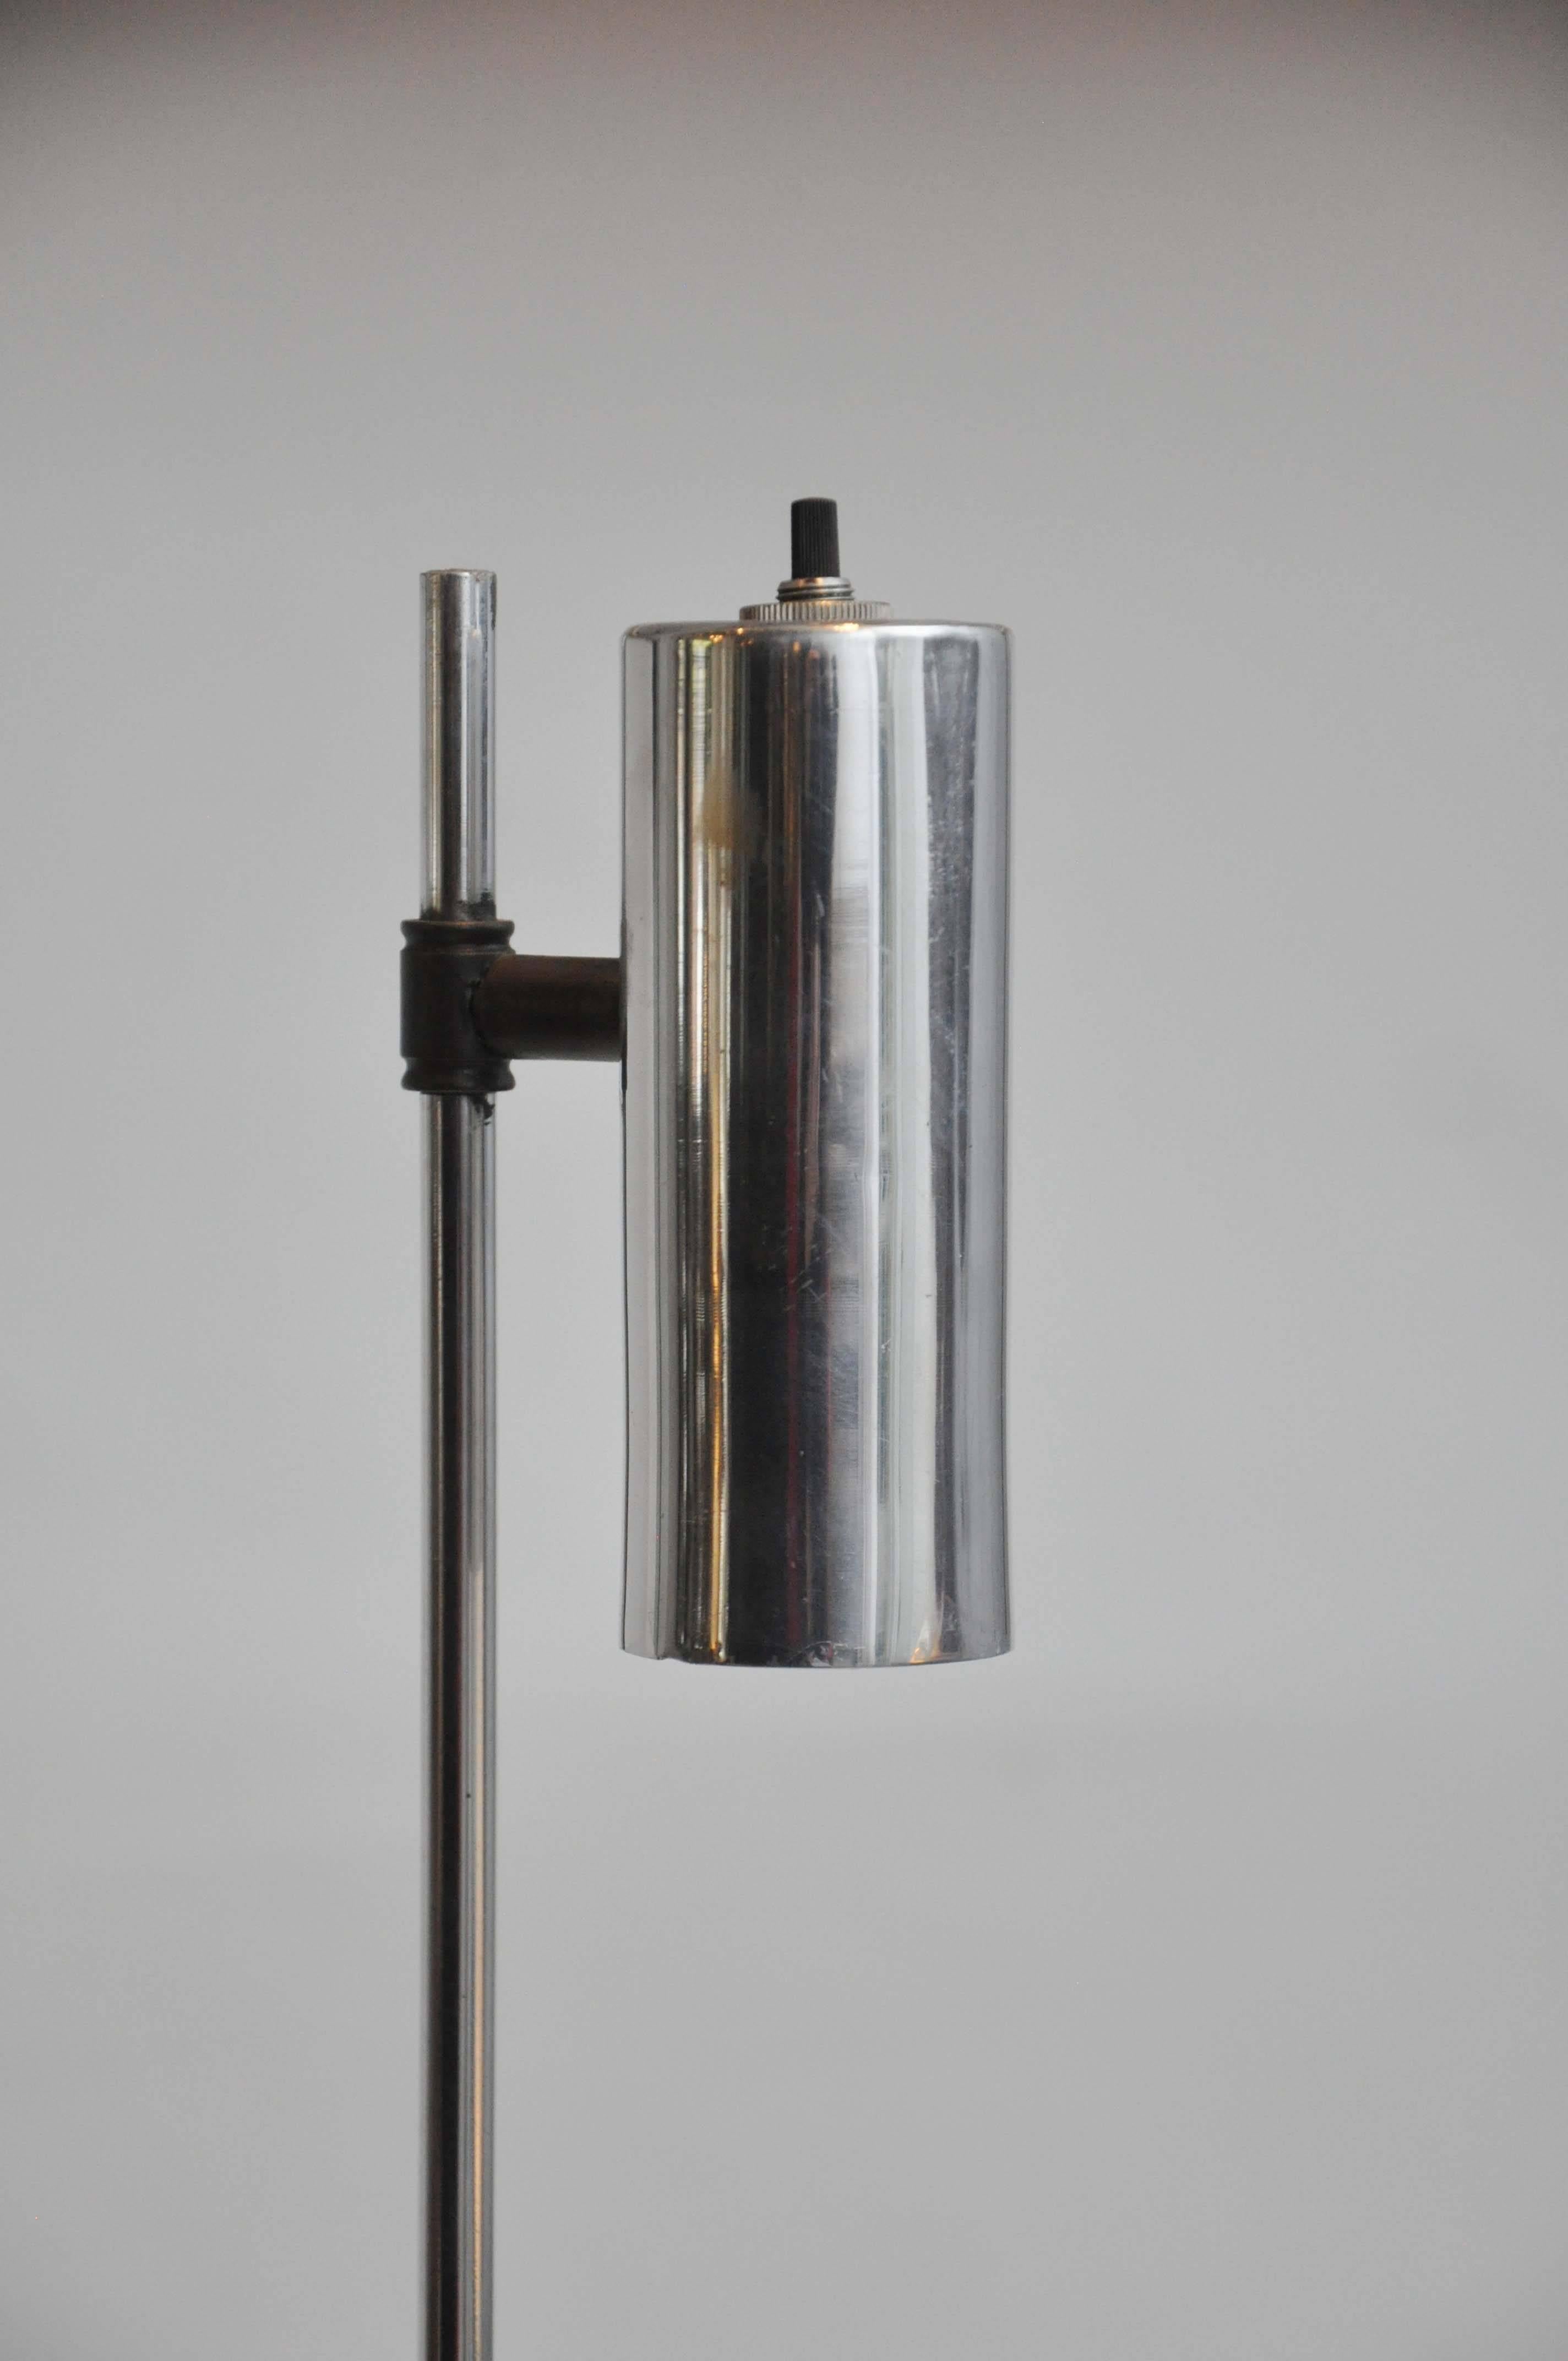 Mid 20th Century Robert Sonneman Chrome Cylindrical Floor Lamp.
Polished chrome-plated finish. Features adjustable head, black metal base. 
Chrome is in very good vintage condition.


Dimension: 56" H, Base is 4" W x 4" D x 4" H.